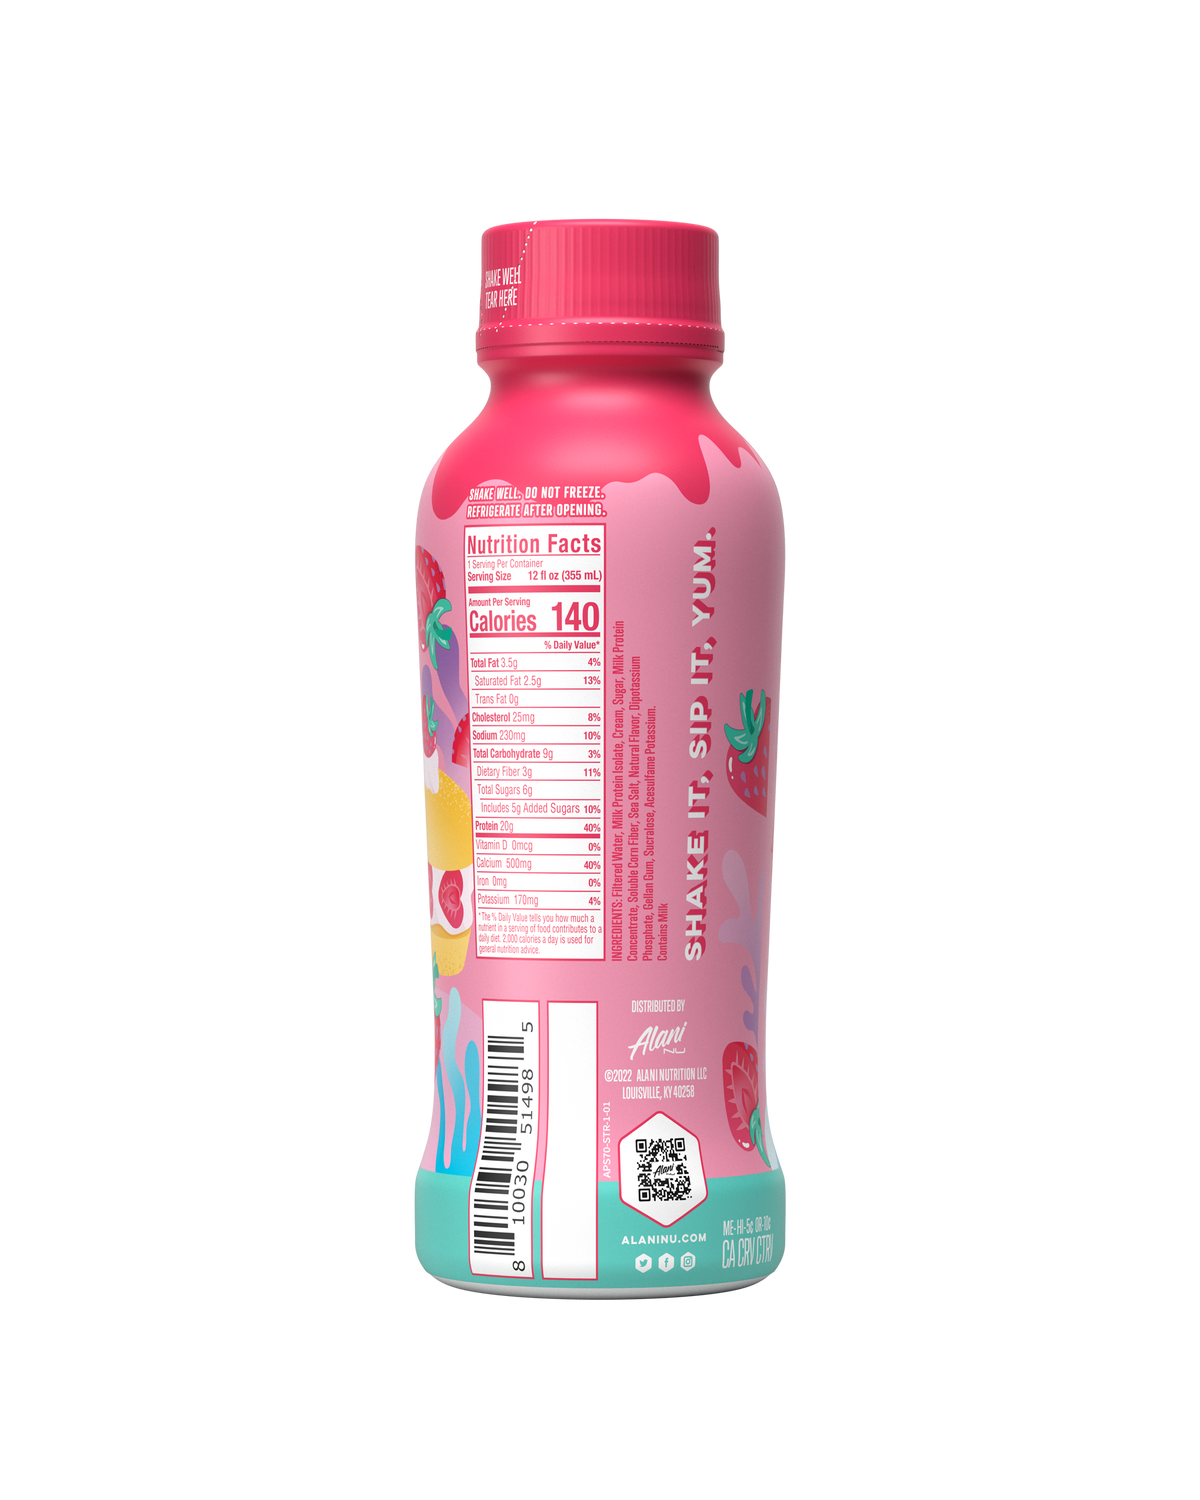 A back view of Protein Shake in Strawberry Shortcake flavor highlighting nutrition facts.